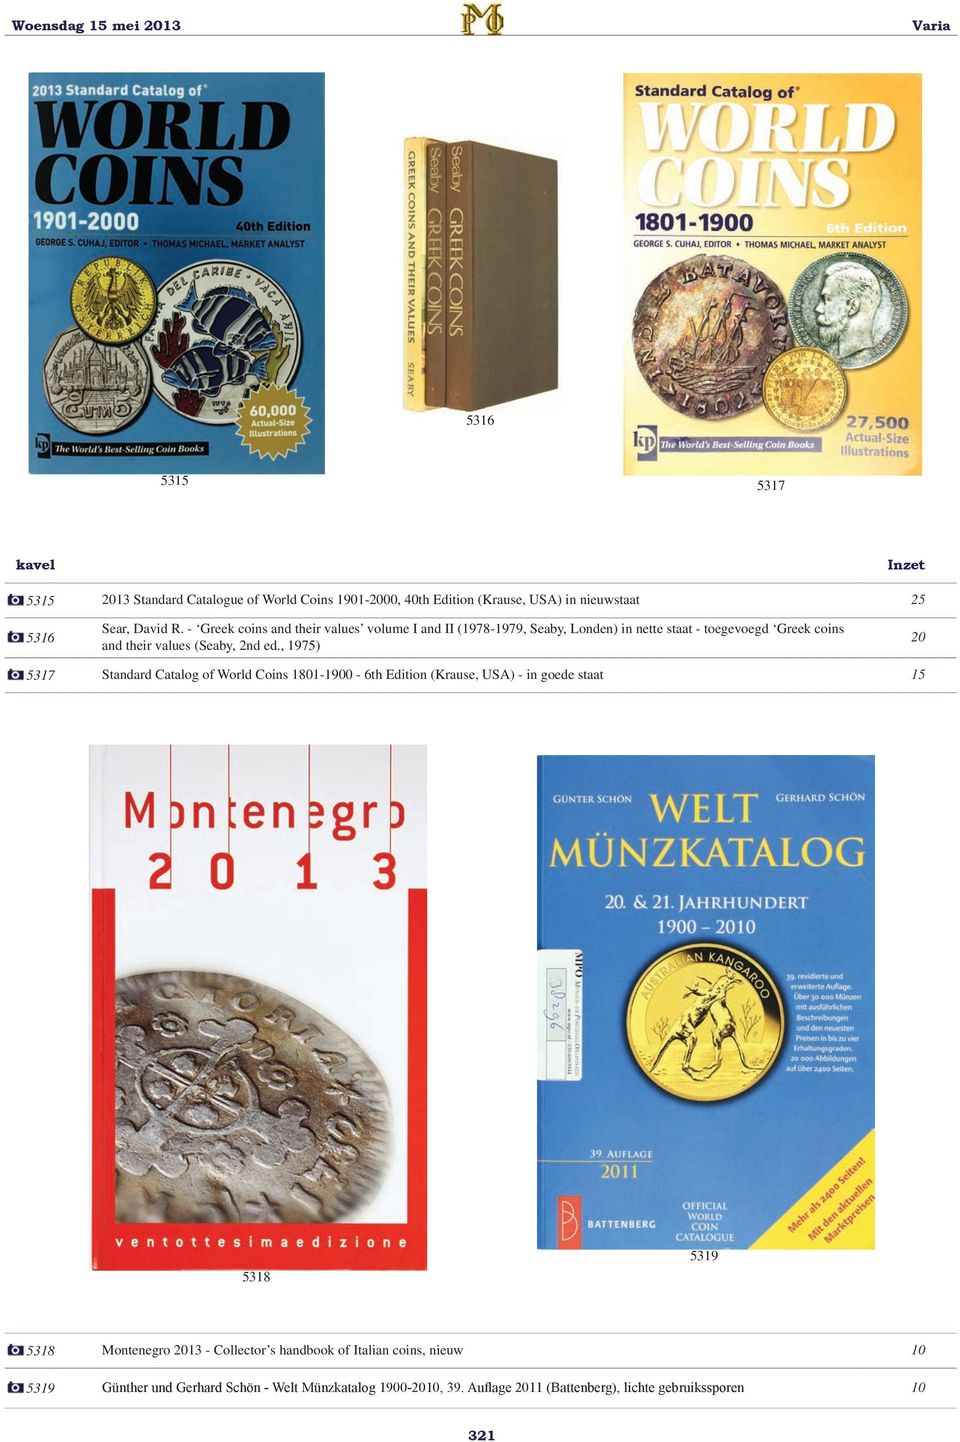 ed., 1975) 20 5317 Standard Catalog of World Coins 1801-1900 - 6th Edition (Krause, USA) - in goede staat 15 5318 5319 5318 Montenegro 2013 -